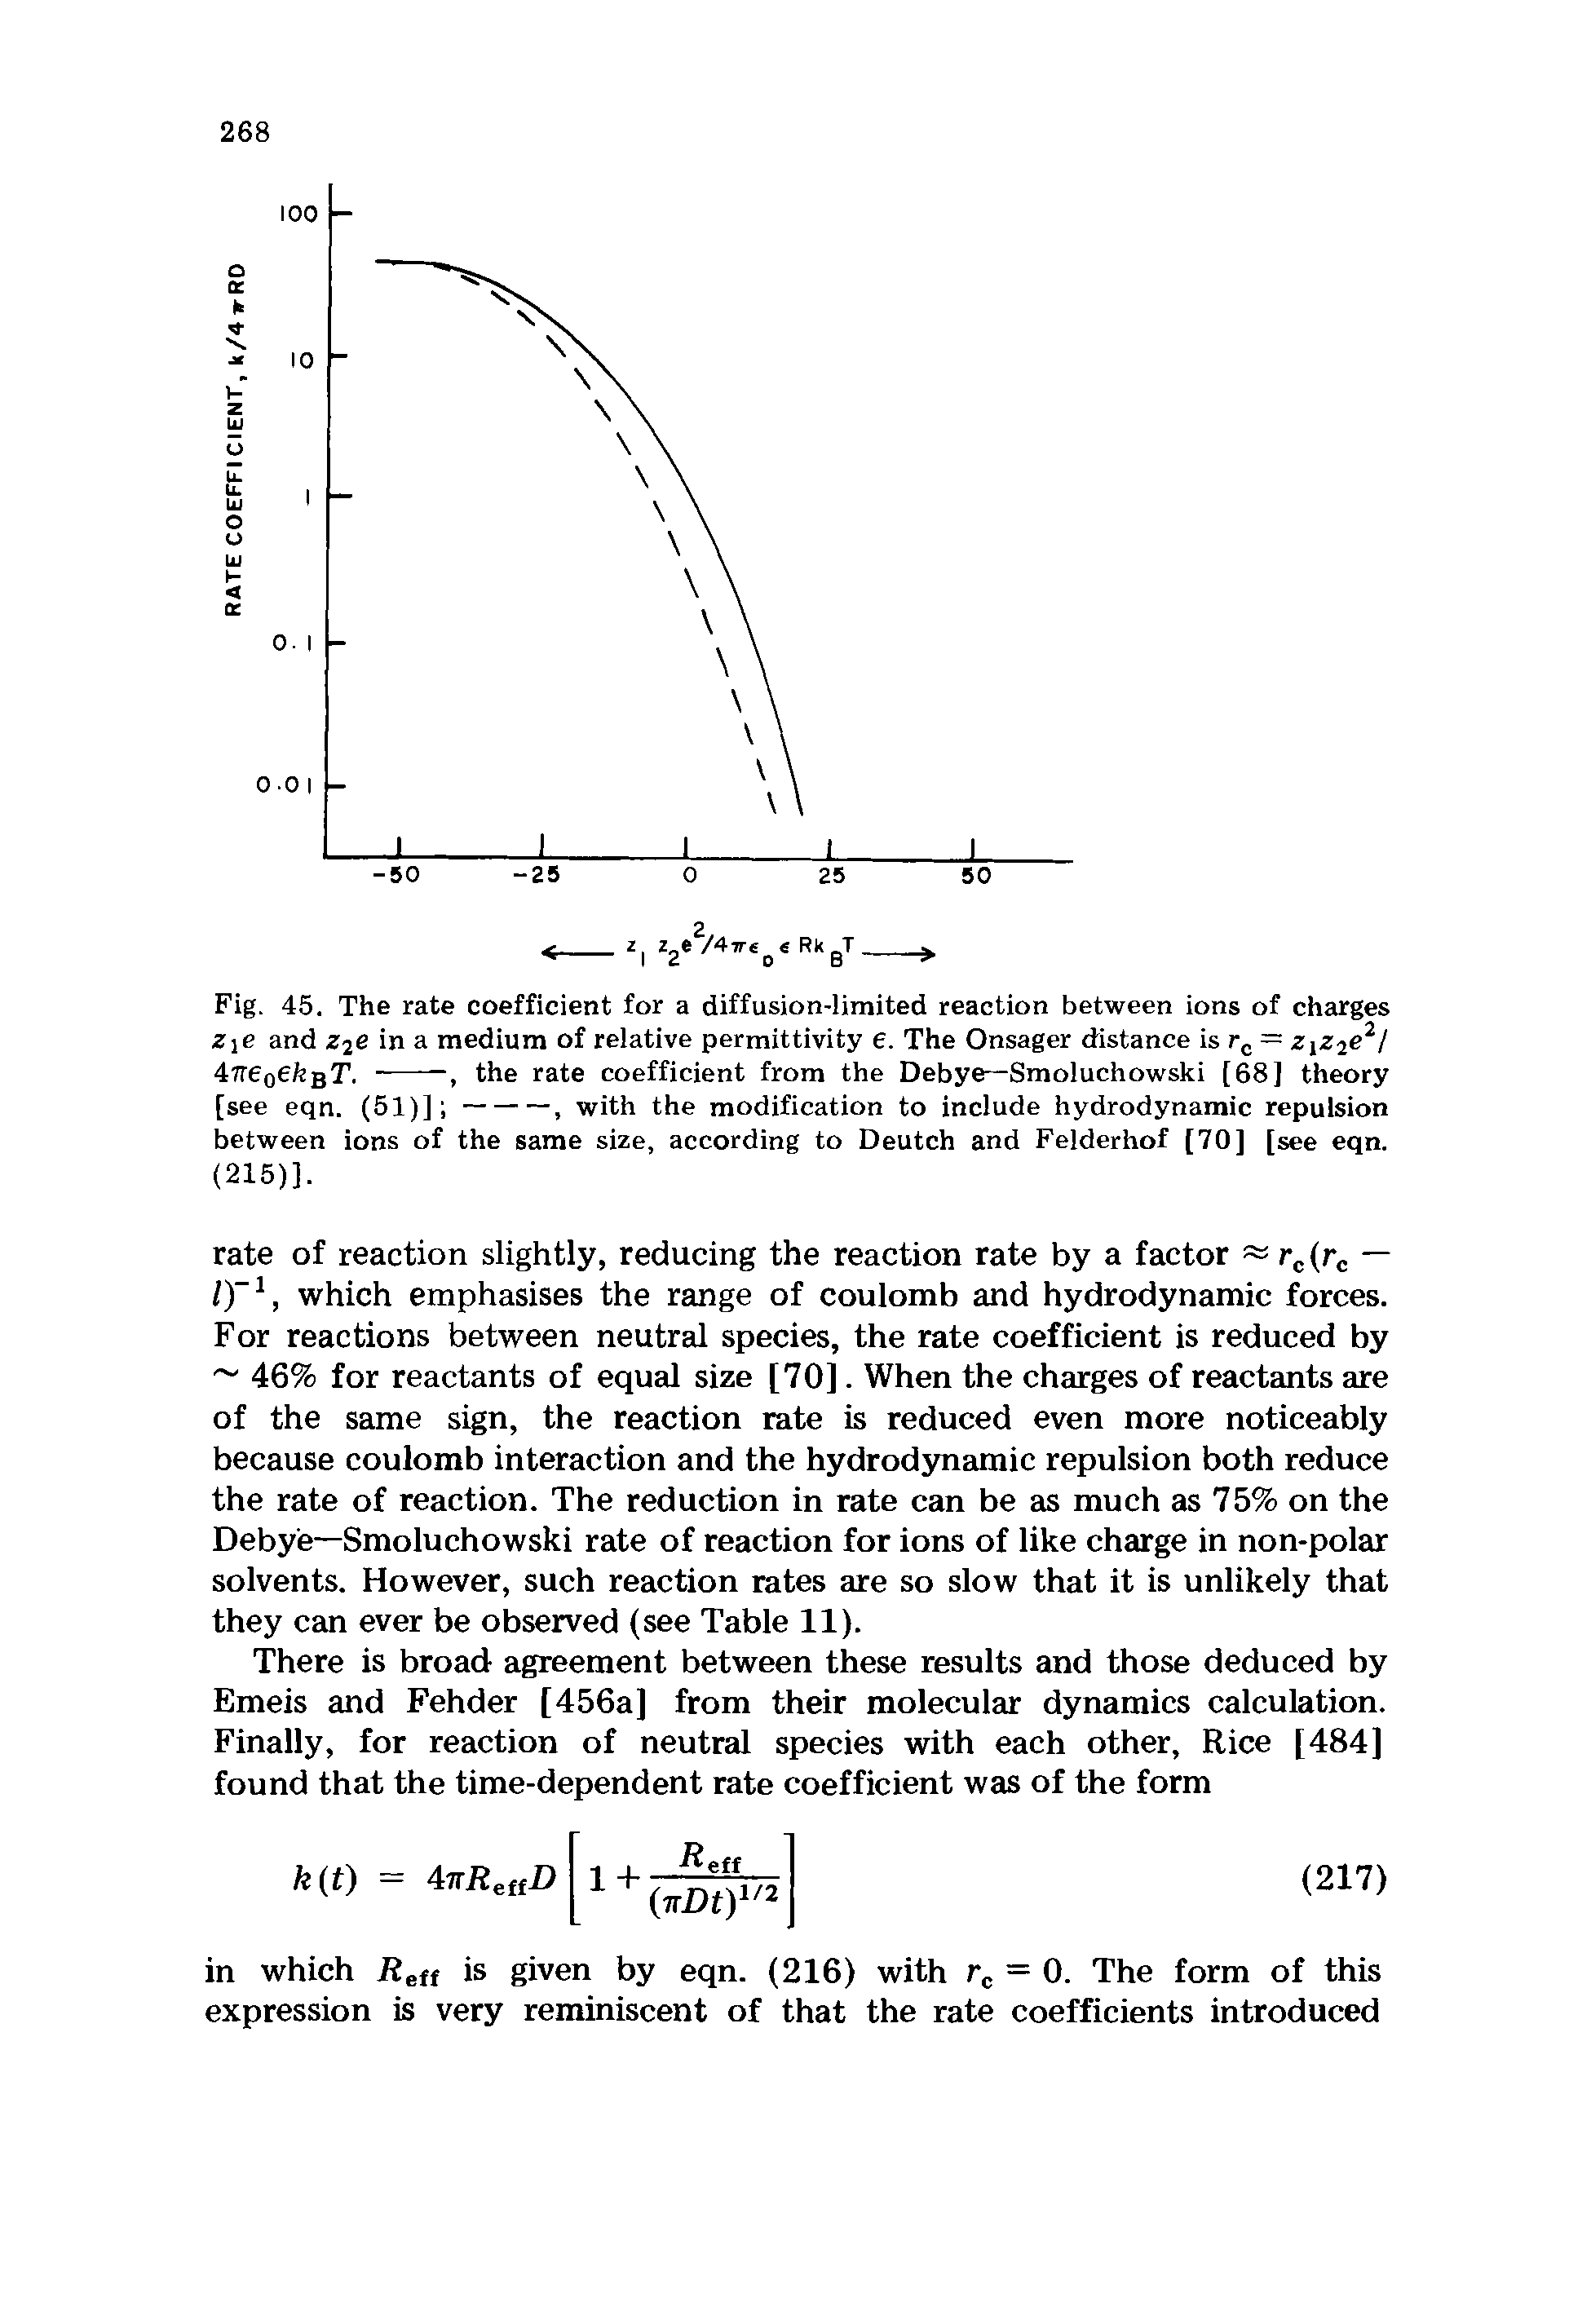 Fig. 45. The rate coefficient for a diffusion-limited reaction between ions of charges Zje and z2e in a medium of relative permittivity e. The Onsager distance is rc = ZjZ2e2/...